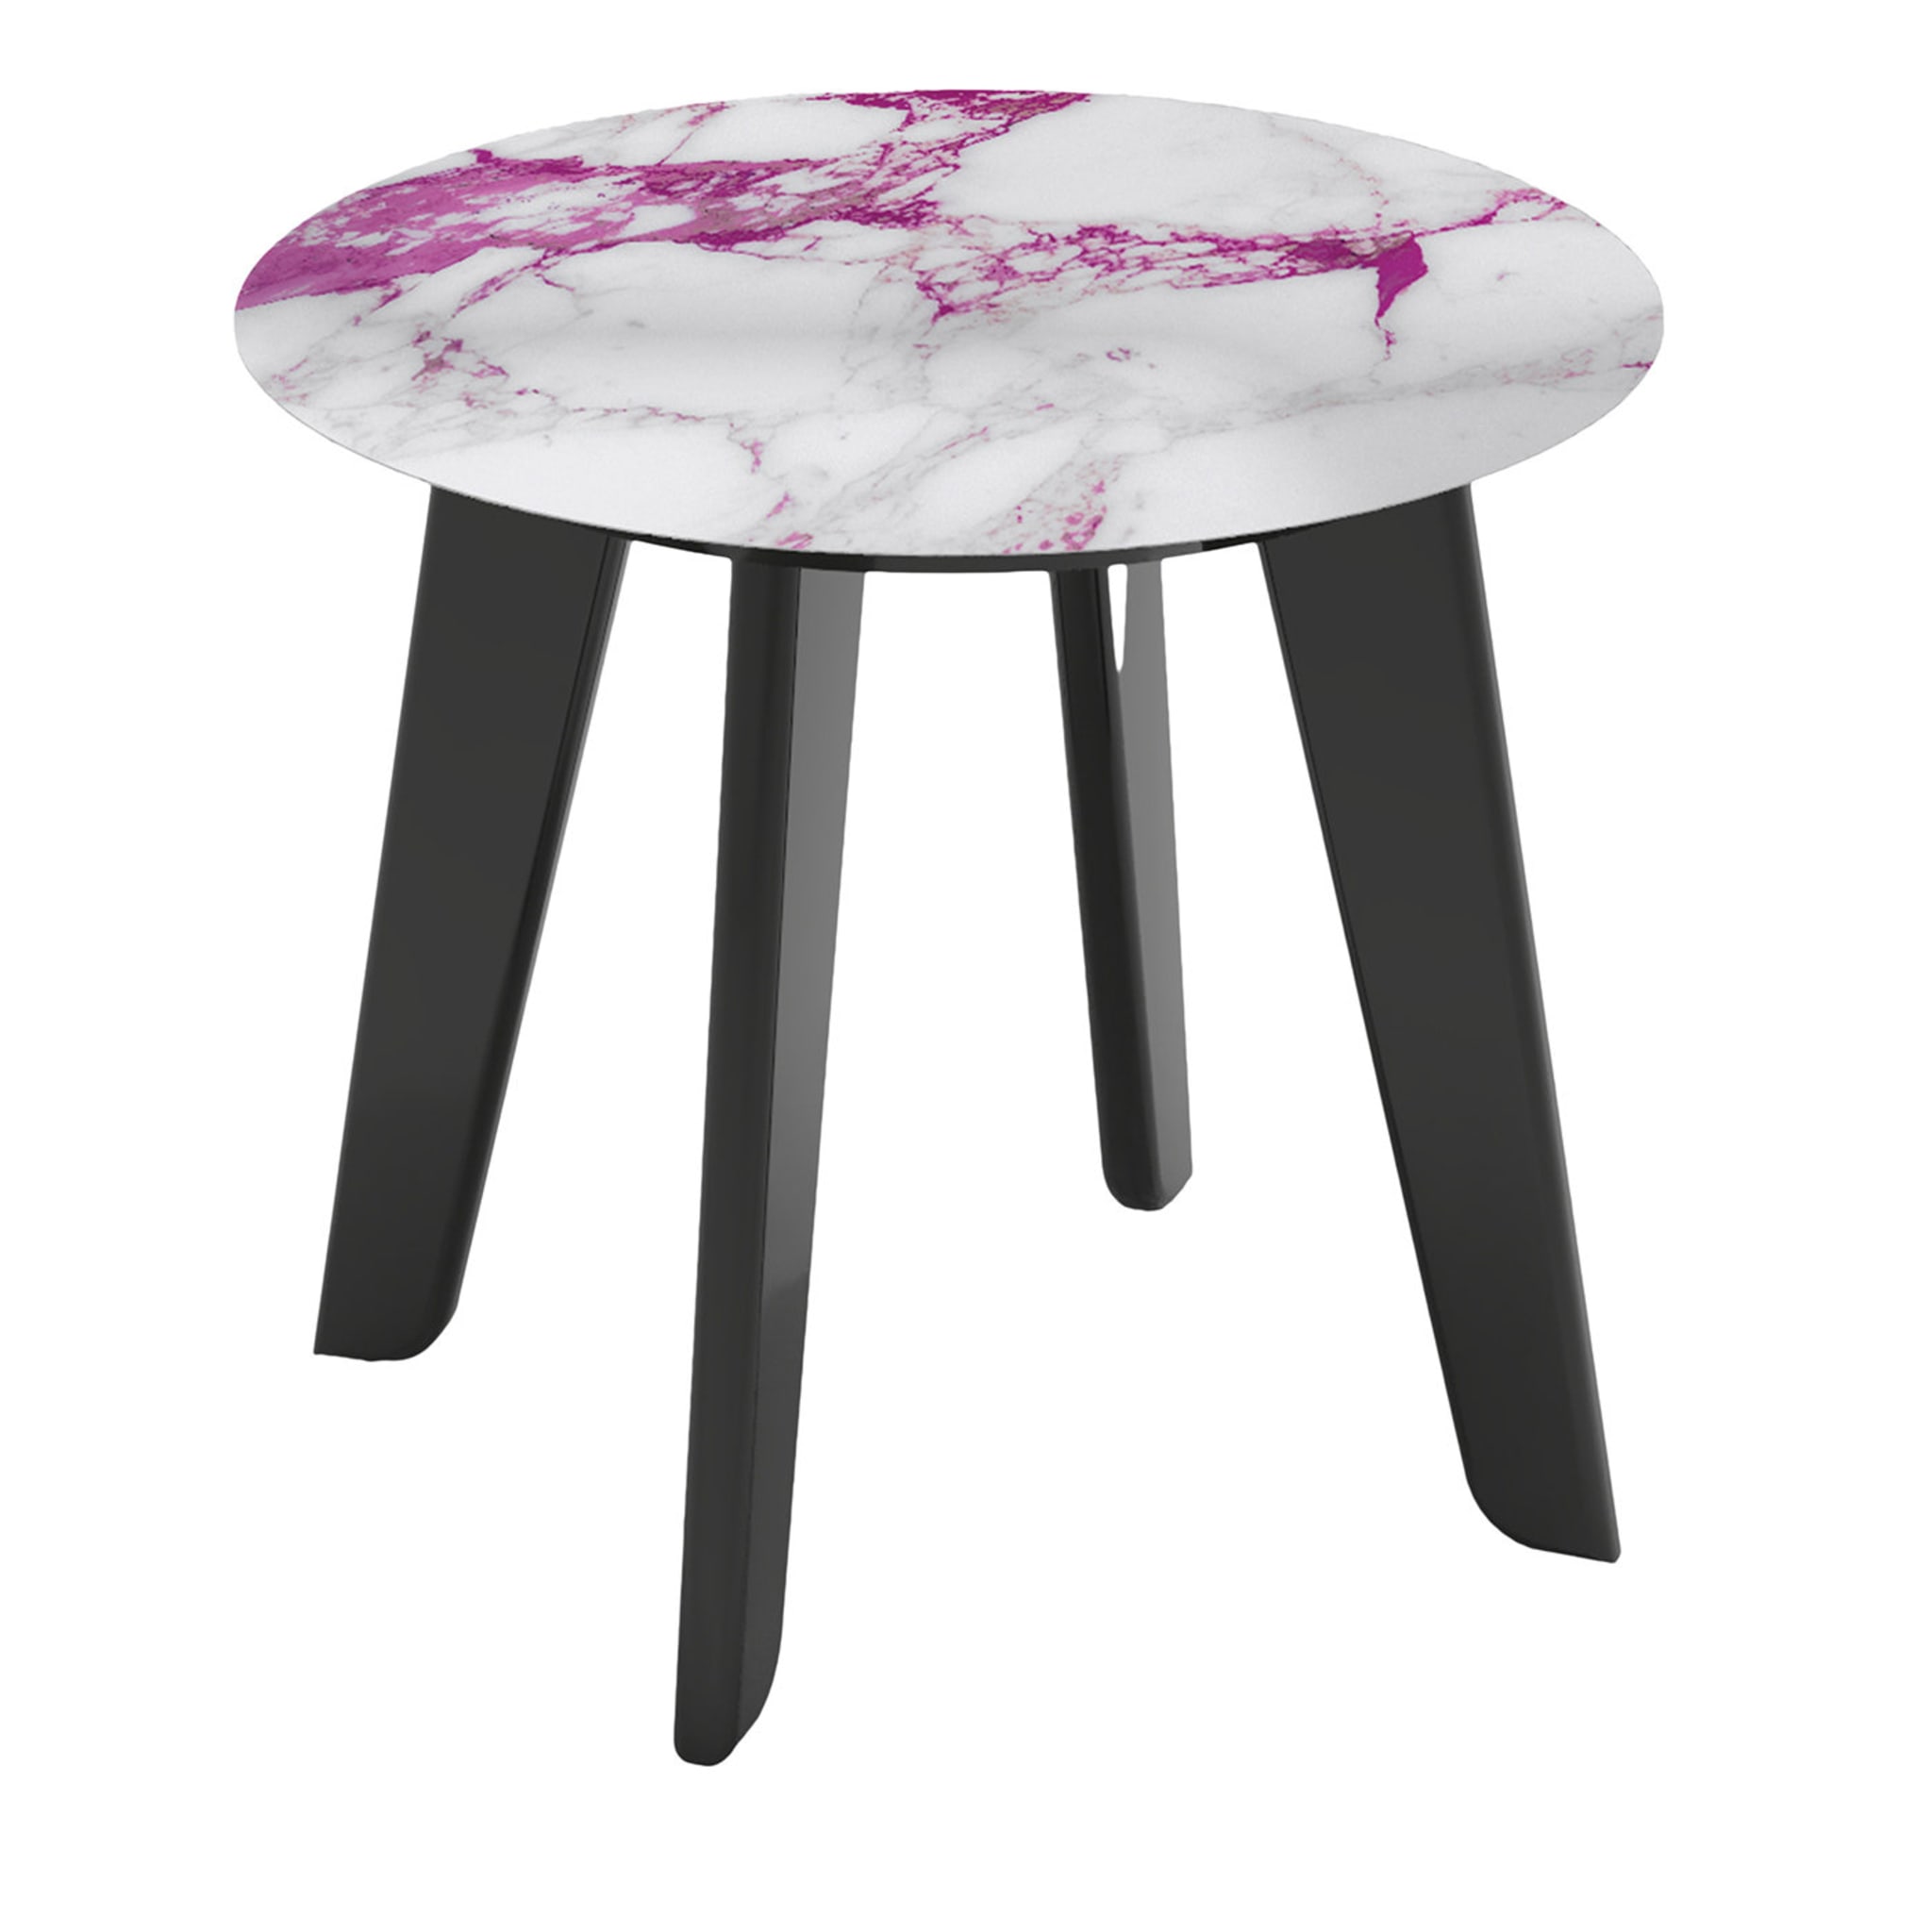 Owen Low Round Side Table with White and Pink Top (Table d'appoint ronde basse avec plateau blanc et rose) - Vue principale